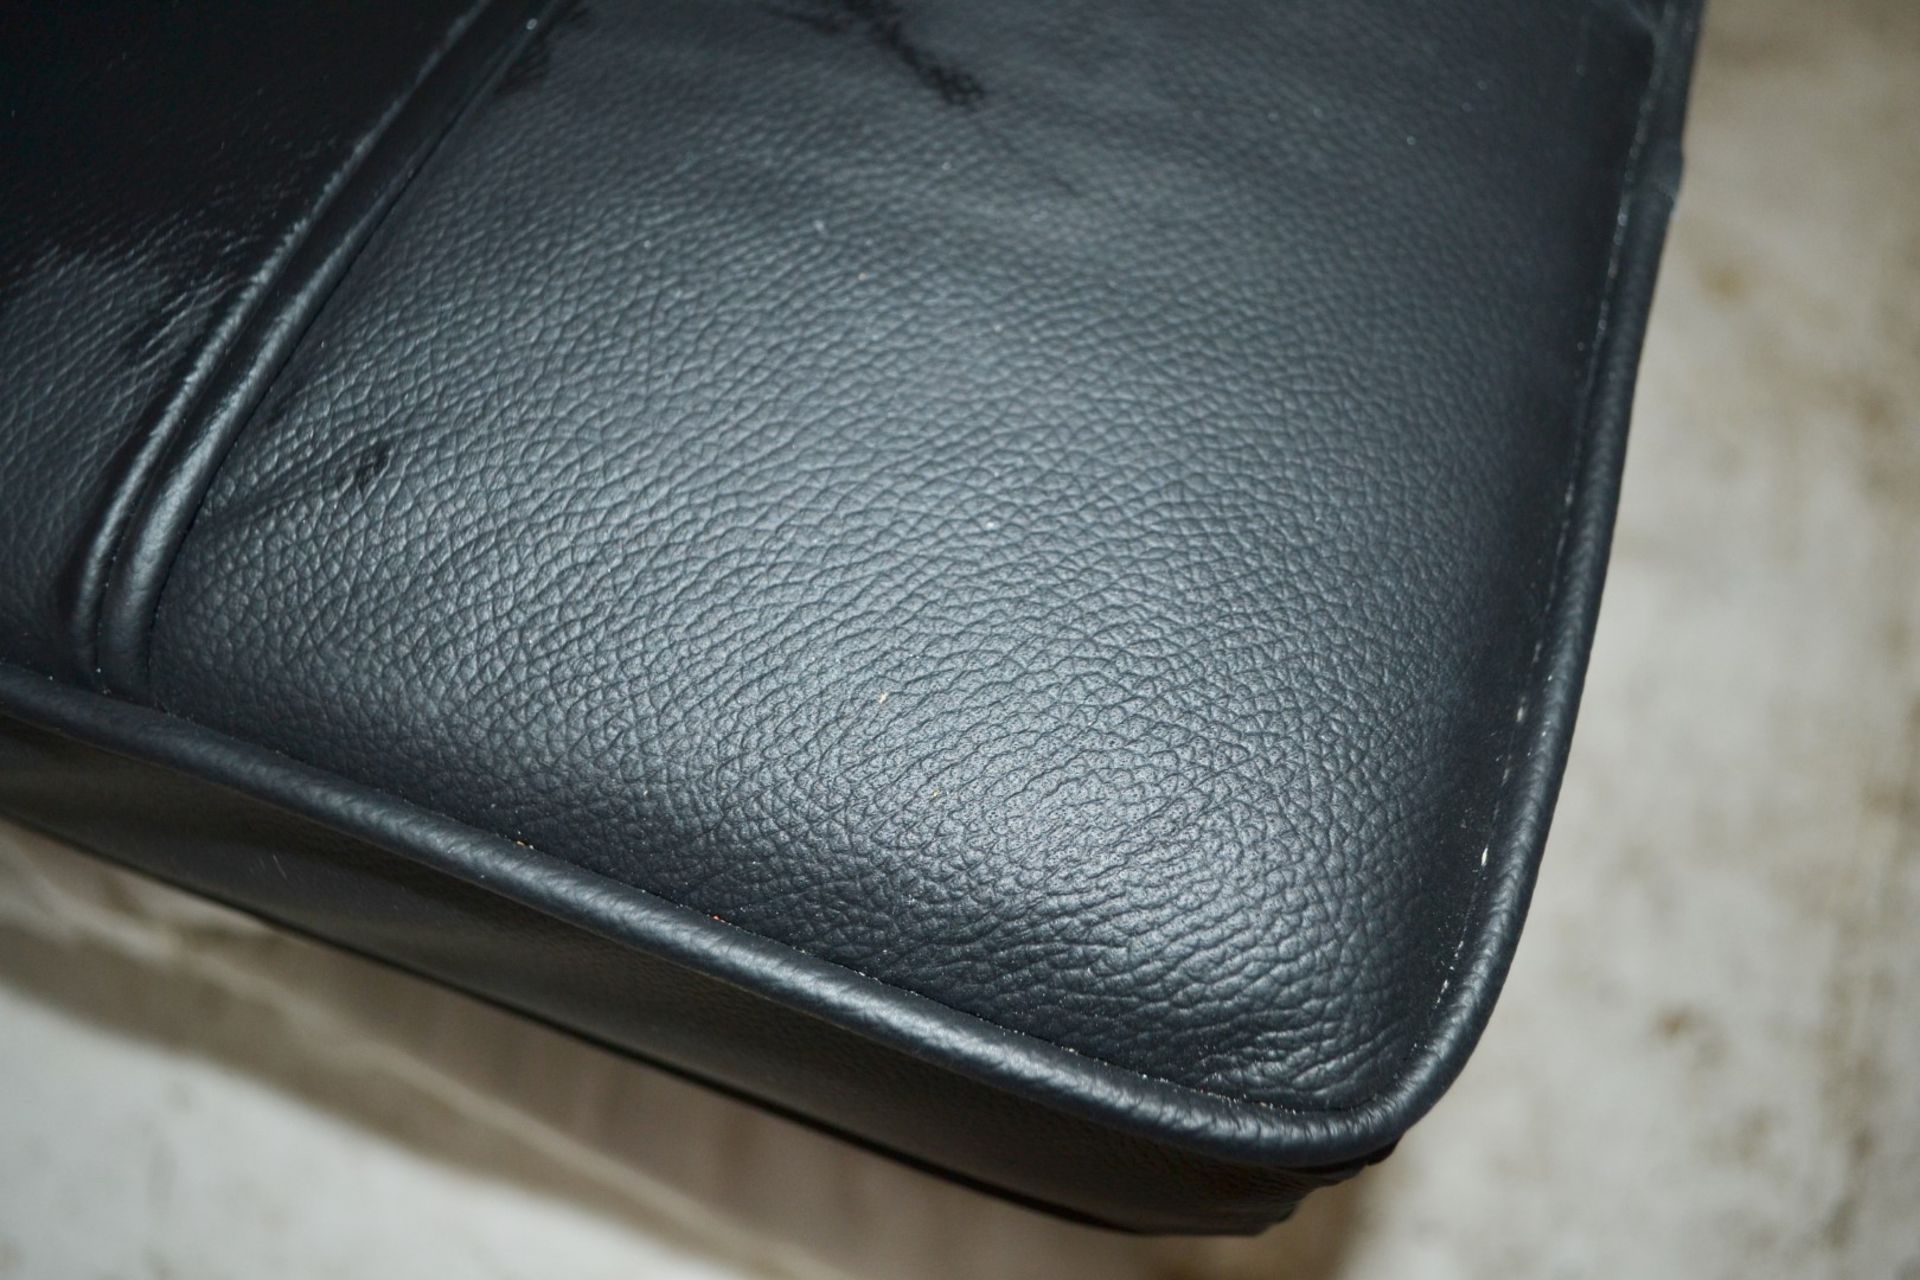 1 x Black Leather Square Foot Stool With Stainless Steel Cross Legs - Ref: BLT388 - Location: WA14 - Image 3 of 4